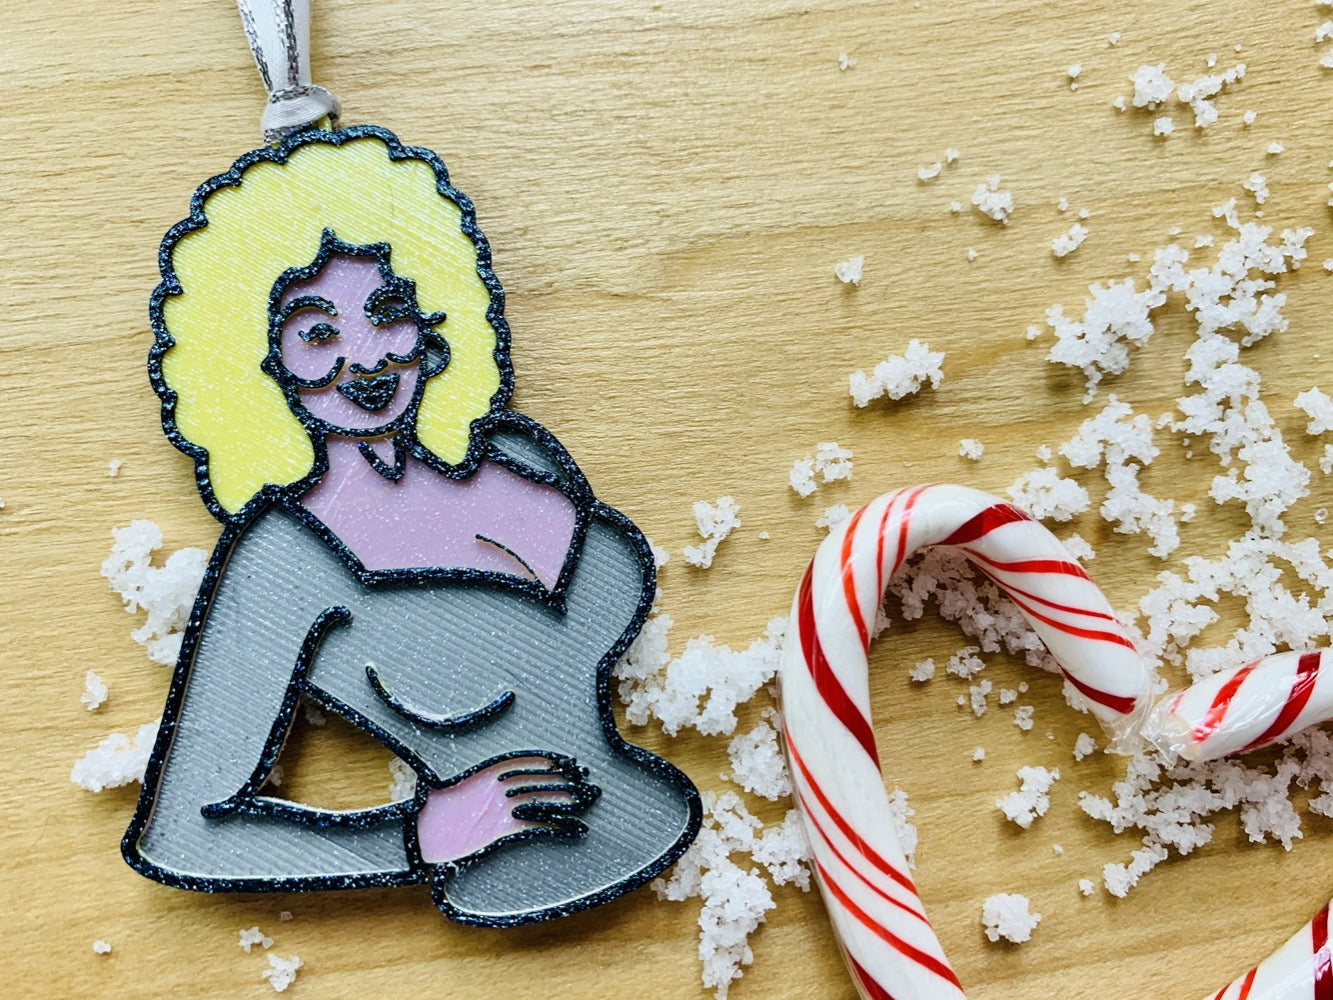 On a wood background with white snow and red and white candy canes is a R+D 3D printed ornament. This ornament is shaped like Dolly Parton. You can see one hand resting on her hip as she wears a silver top. Her trademark neckline and big blond hair is also visible with a smile. The entire ornament is covered in glitter to be able to shimmer and shine in the light.